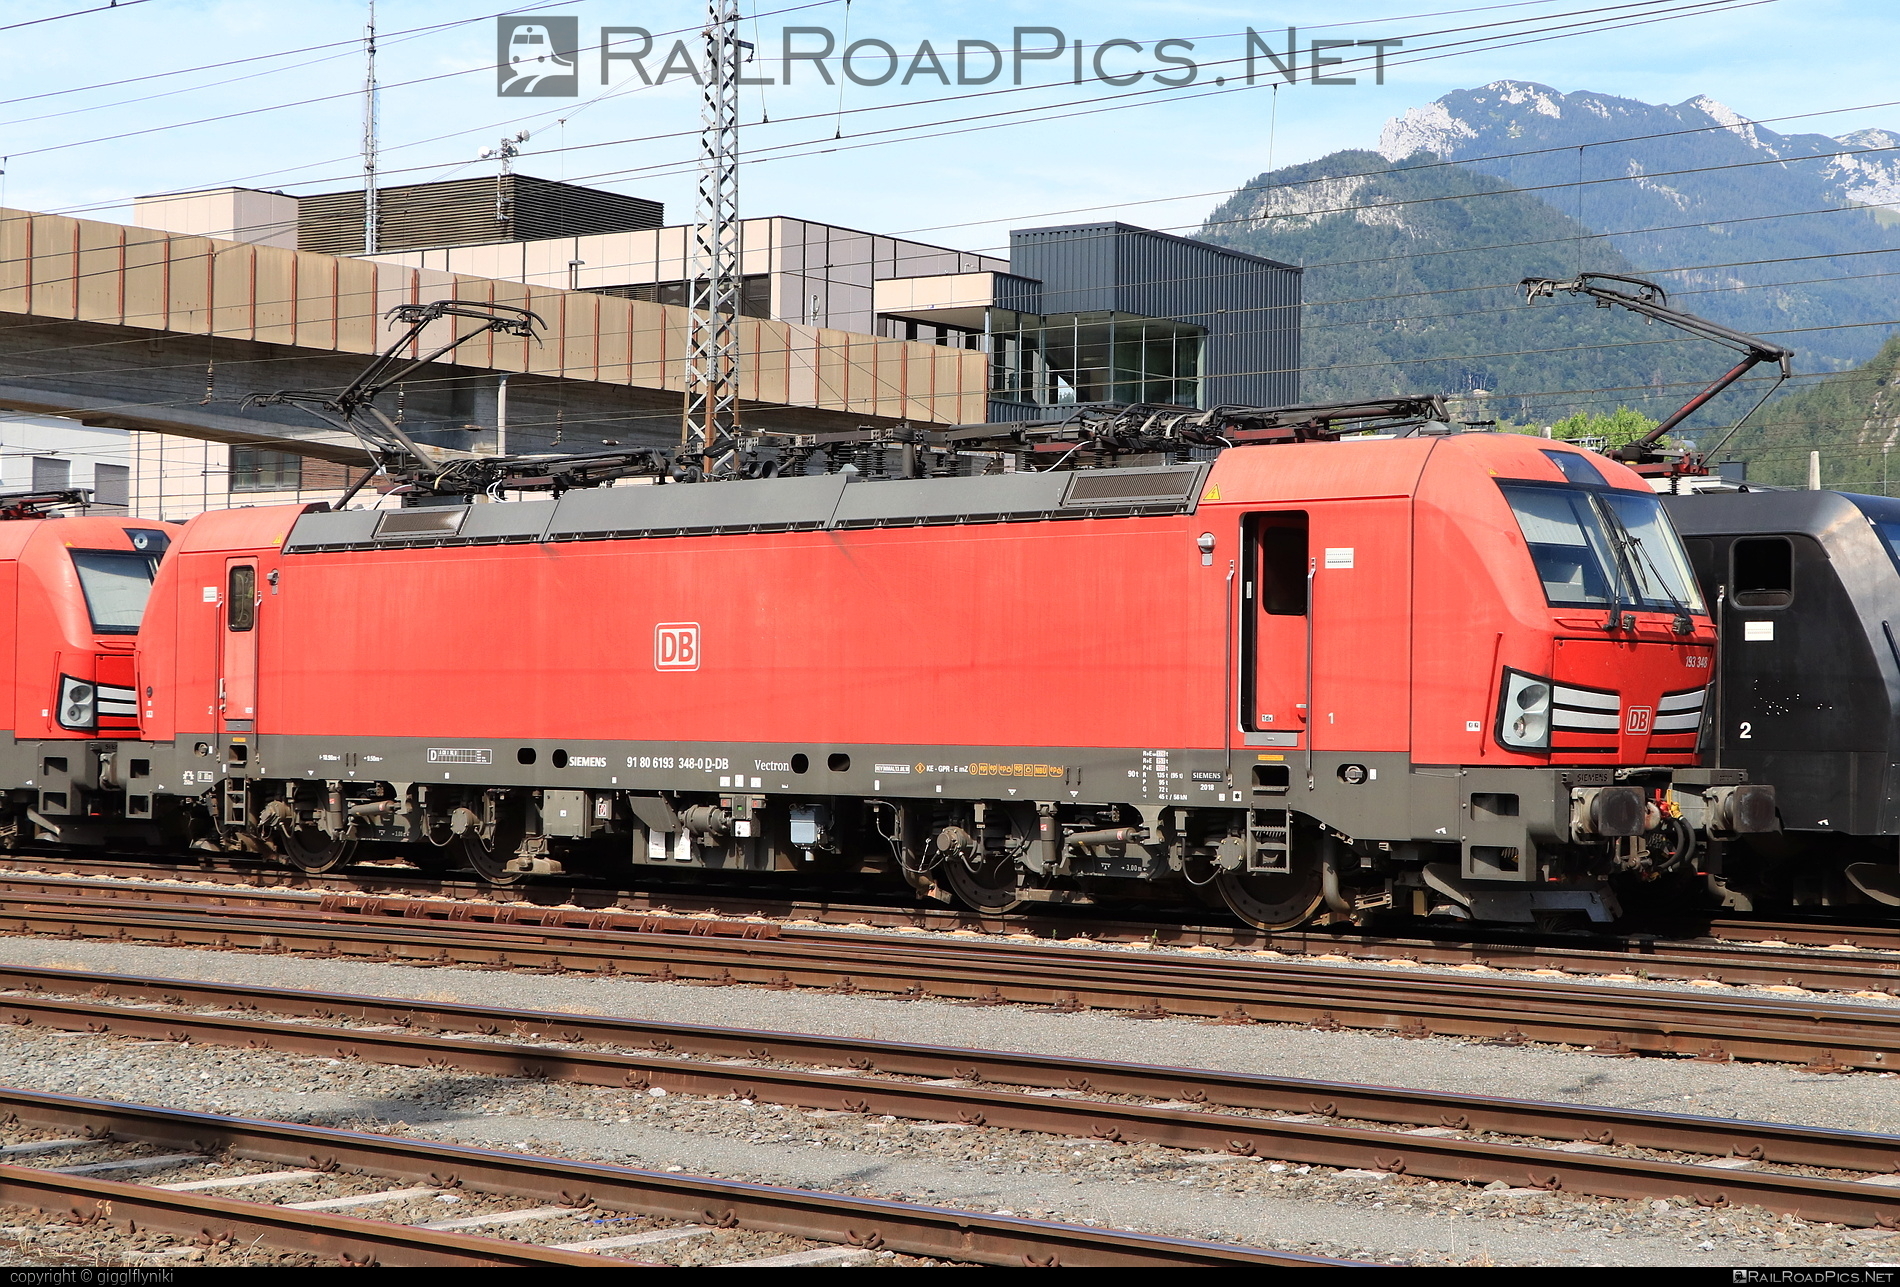 Siemens Vectron MS - 193 348 operated by DB Cargo AG #db #dbcargo #dbcargoag #deutschebahn #siemens #siemensVectron #siemensVectronMS #vectron #vectronMS